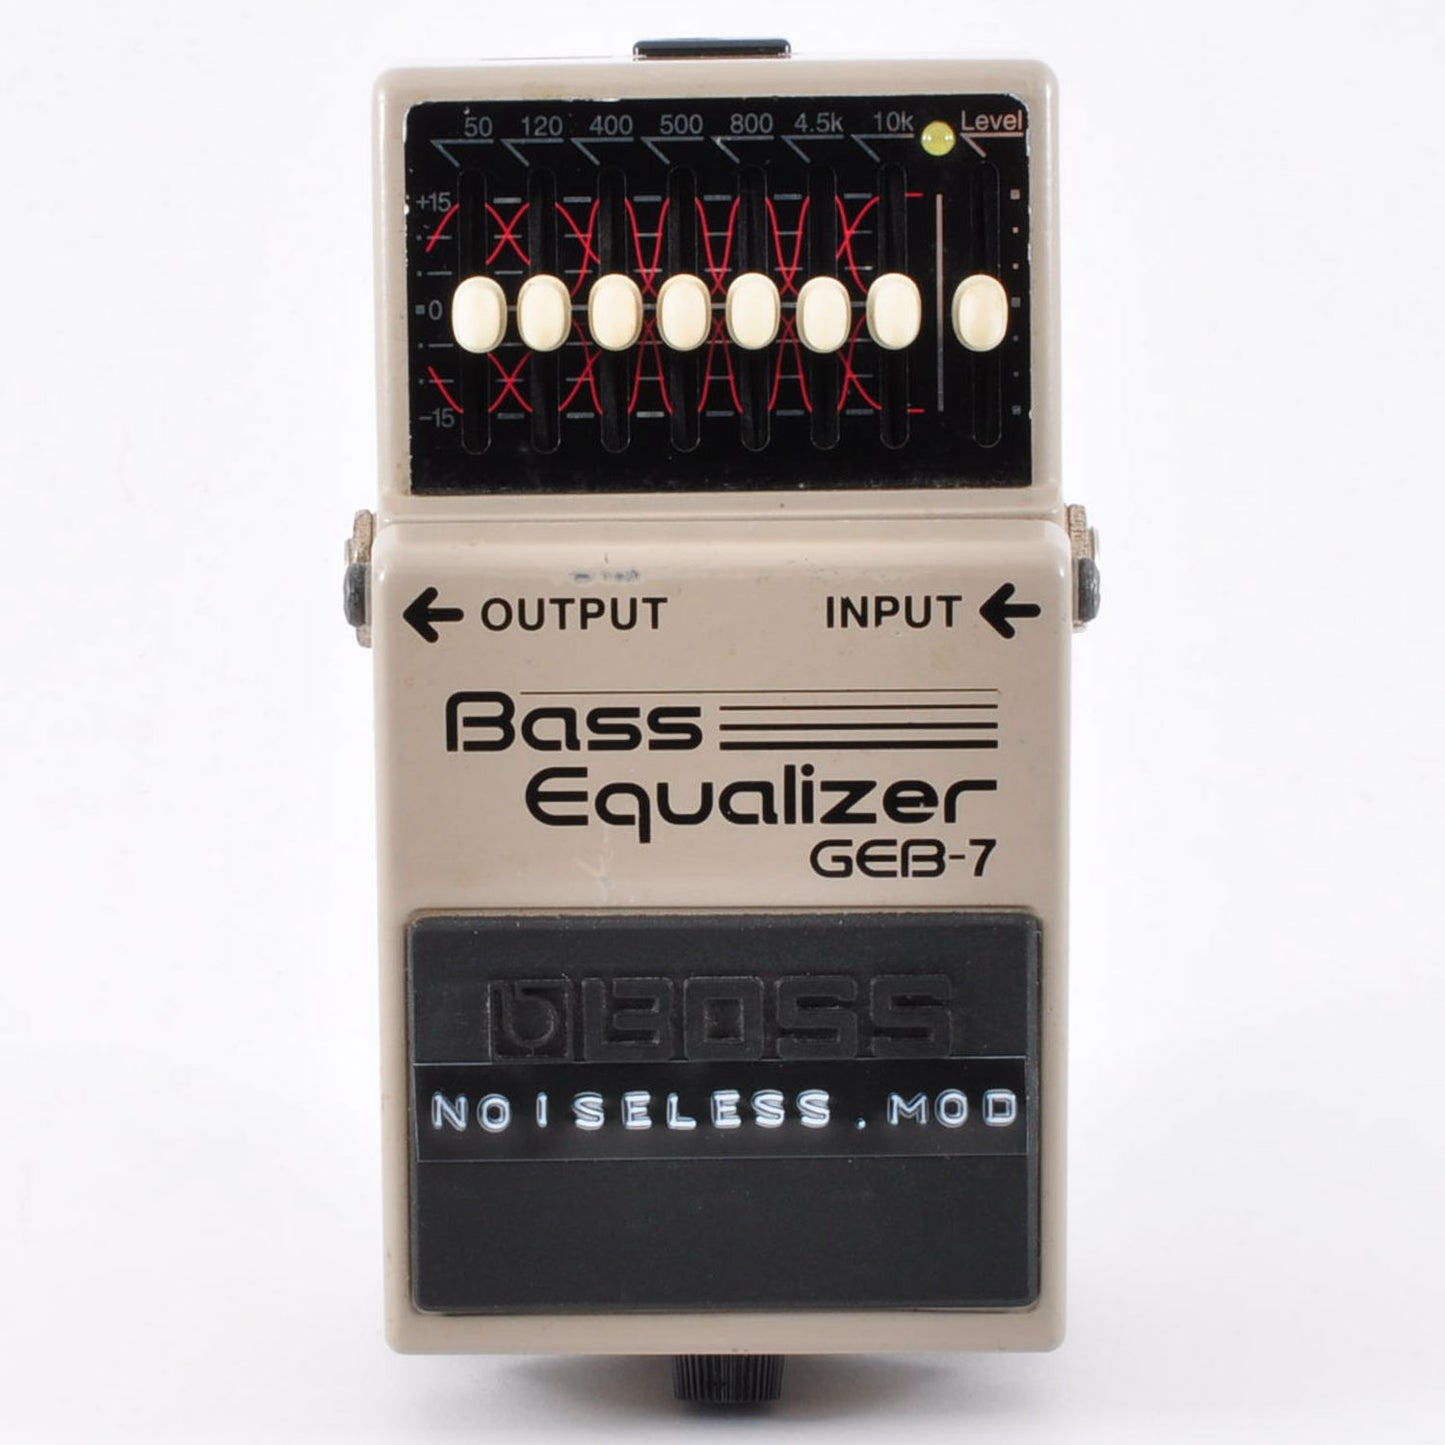 Boss GEB-7 Modified Noiseless For Bass Equalizer EQ Pedal Mod Used From Japan #HW81770